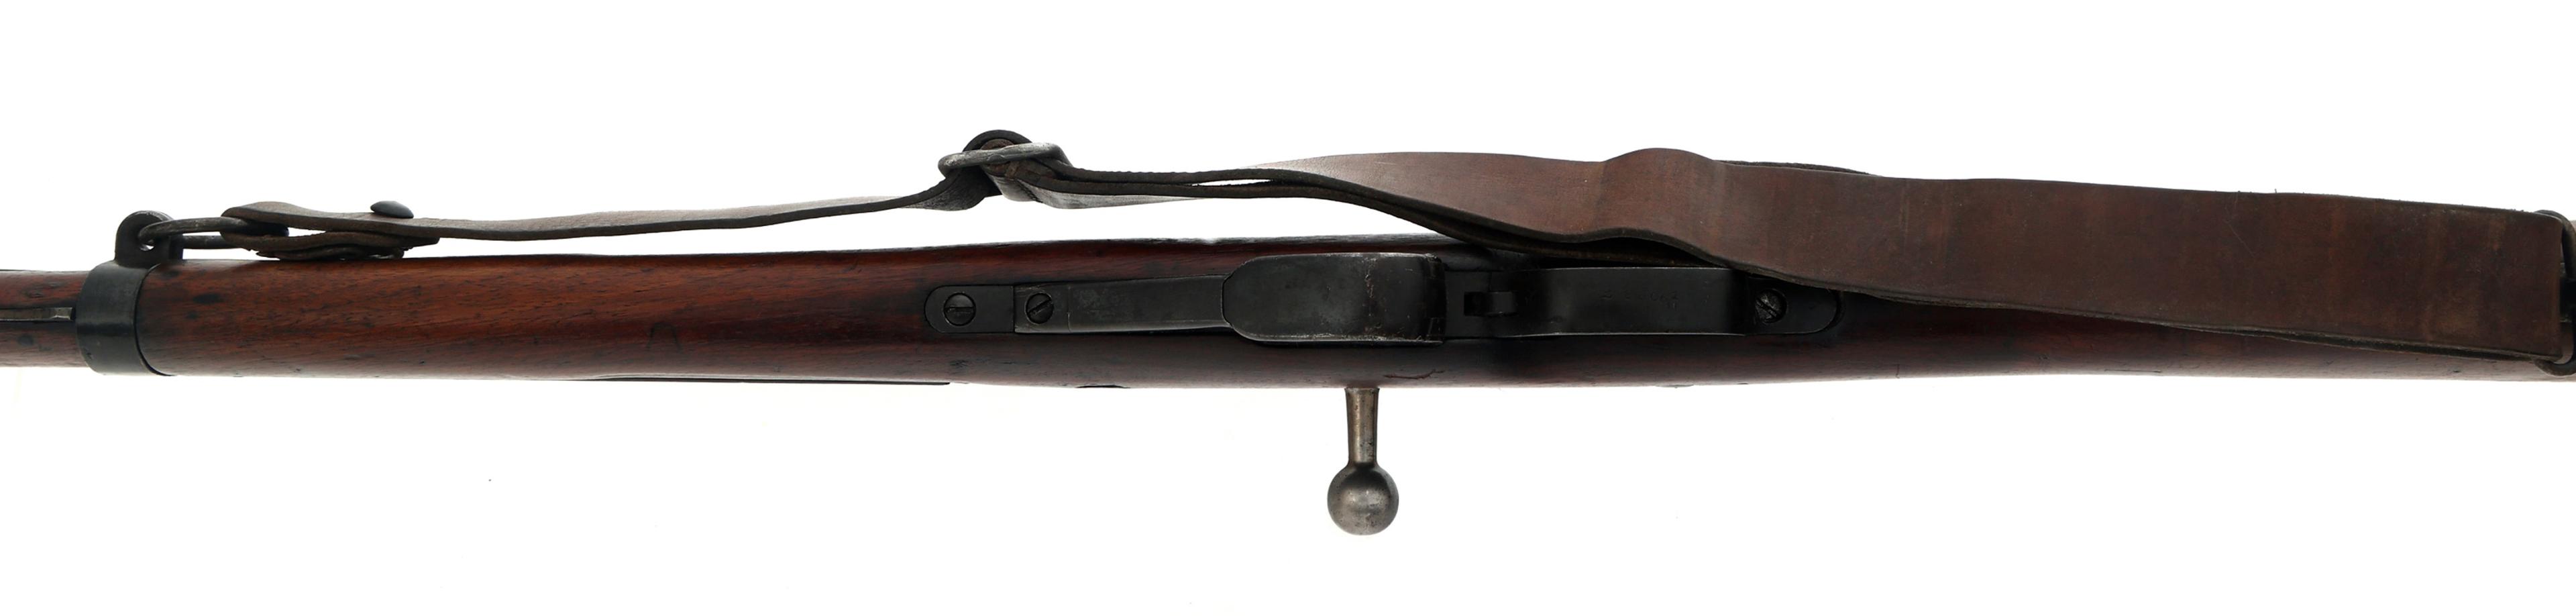 FRENCH ST. ETIENNE MLE 1907-15 8mm BERTHIER RIFLE